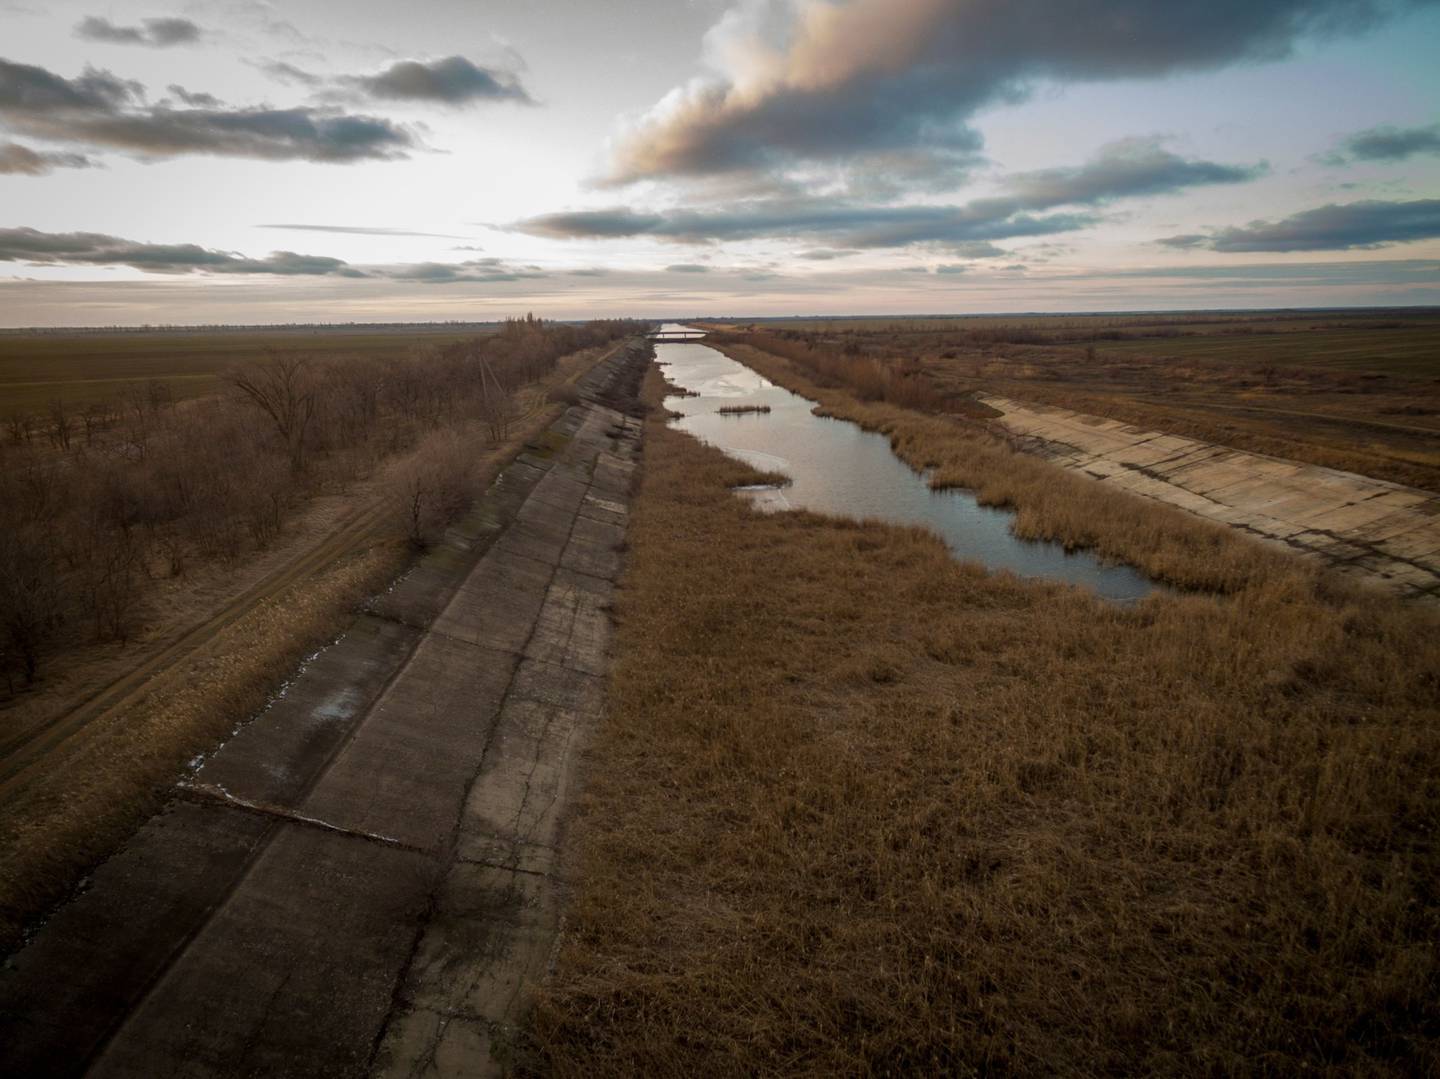 A section of the Northern Crimean Canal where it becomes dry, below a makeshift dam in the Kalanchatski region of Kherson Oblast, Ukraine. The dam has blocked water from reaching Crimea, approximately 25 kilometers south, since 2014. dfd